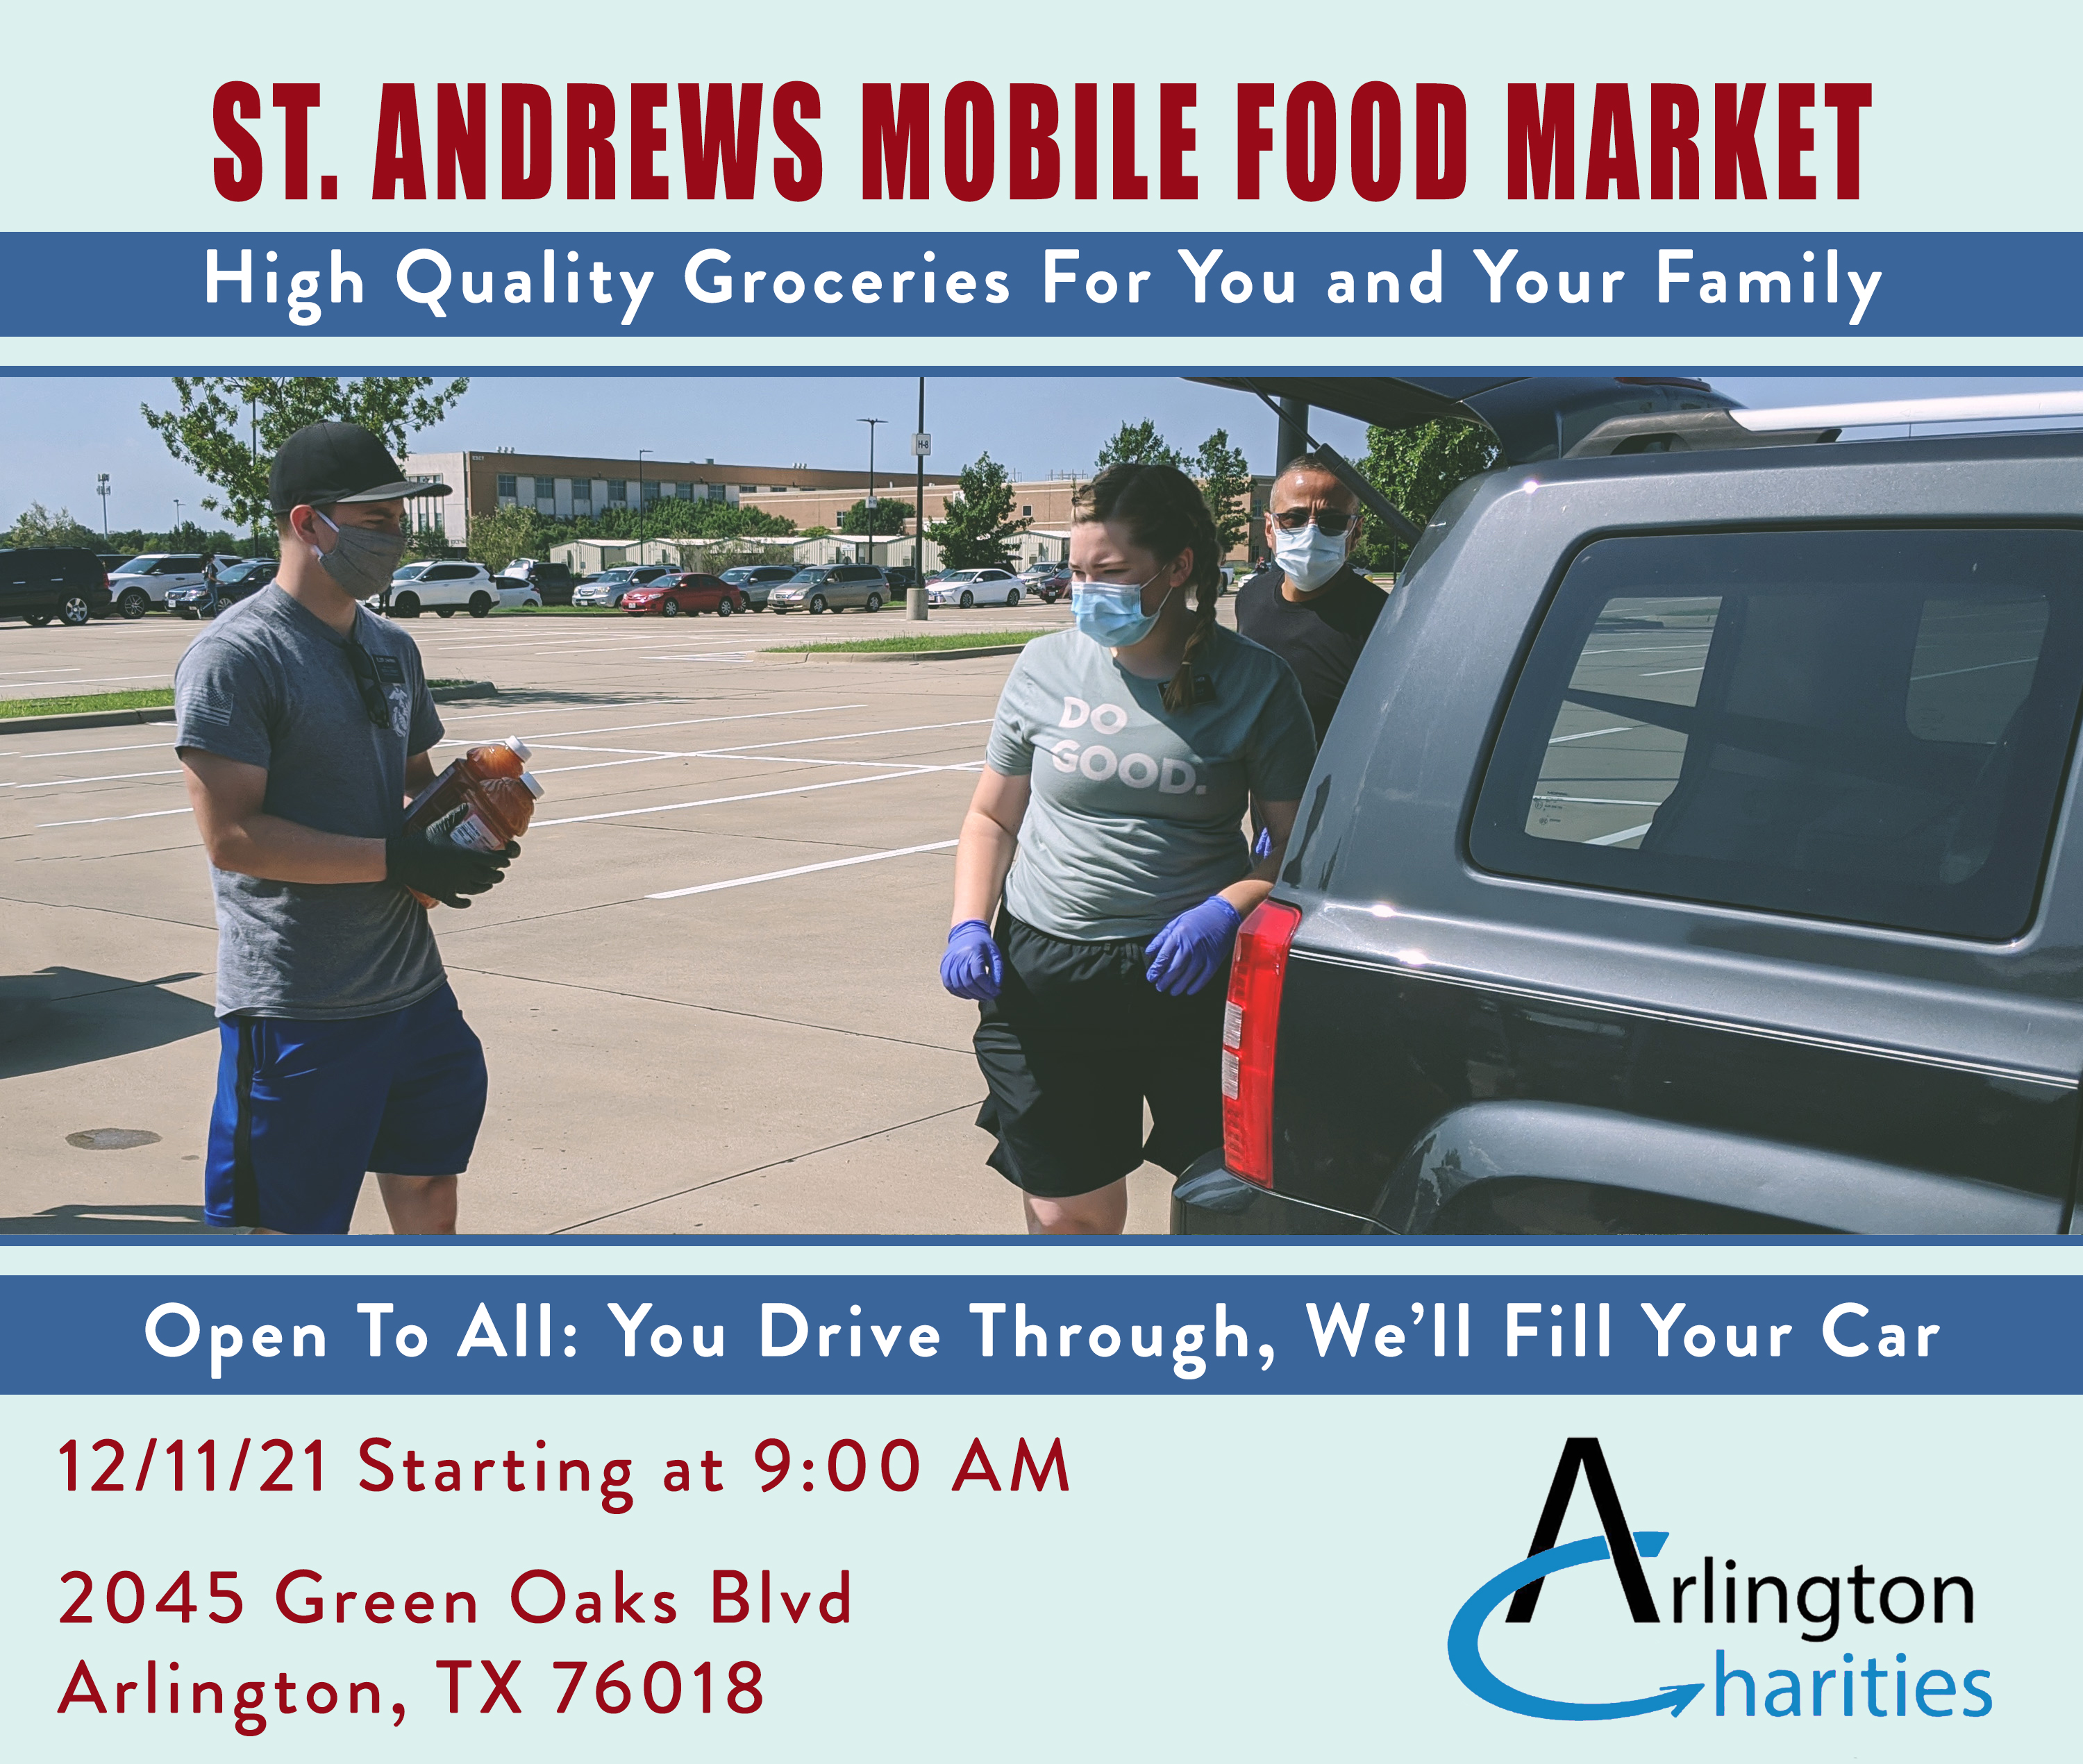 Arlington Charities On Twitter: "Tomorrow: Start Your Weekend Off Right With The Arlington Charities Mobile Food Market At St. Andrews United Methodist Church. All You Have To Do Is Show Up At